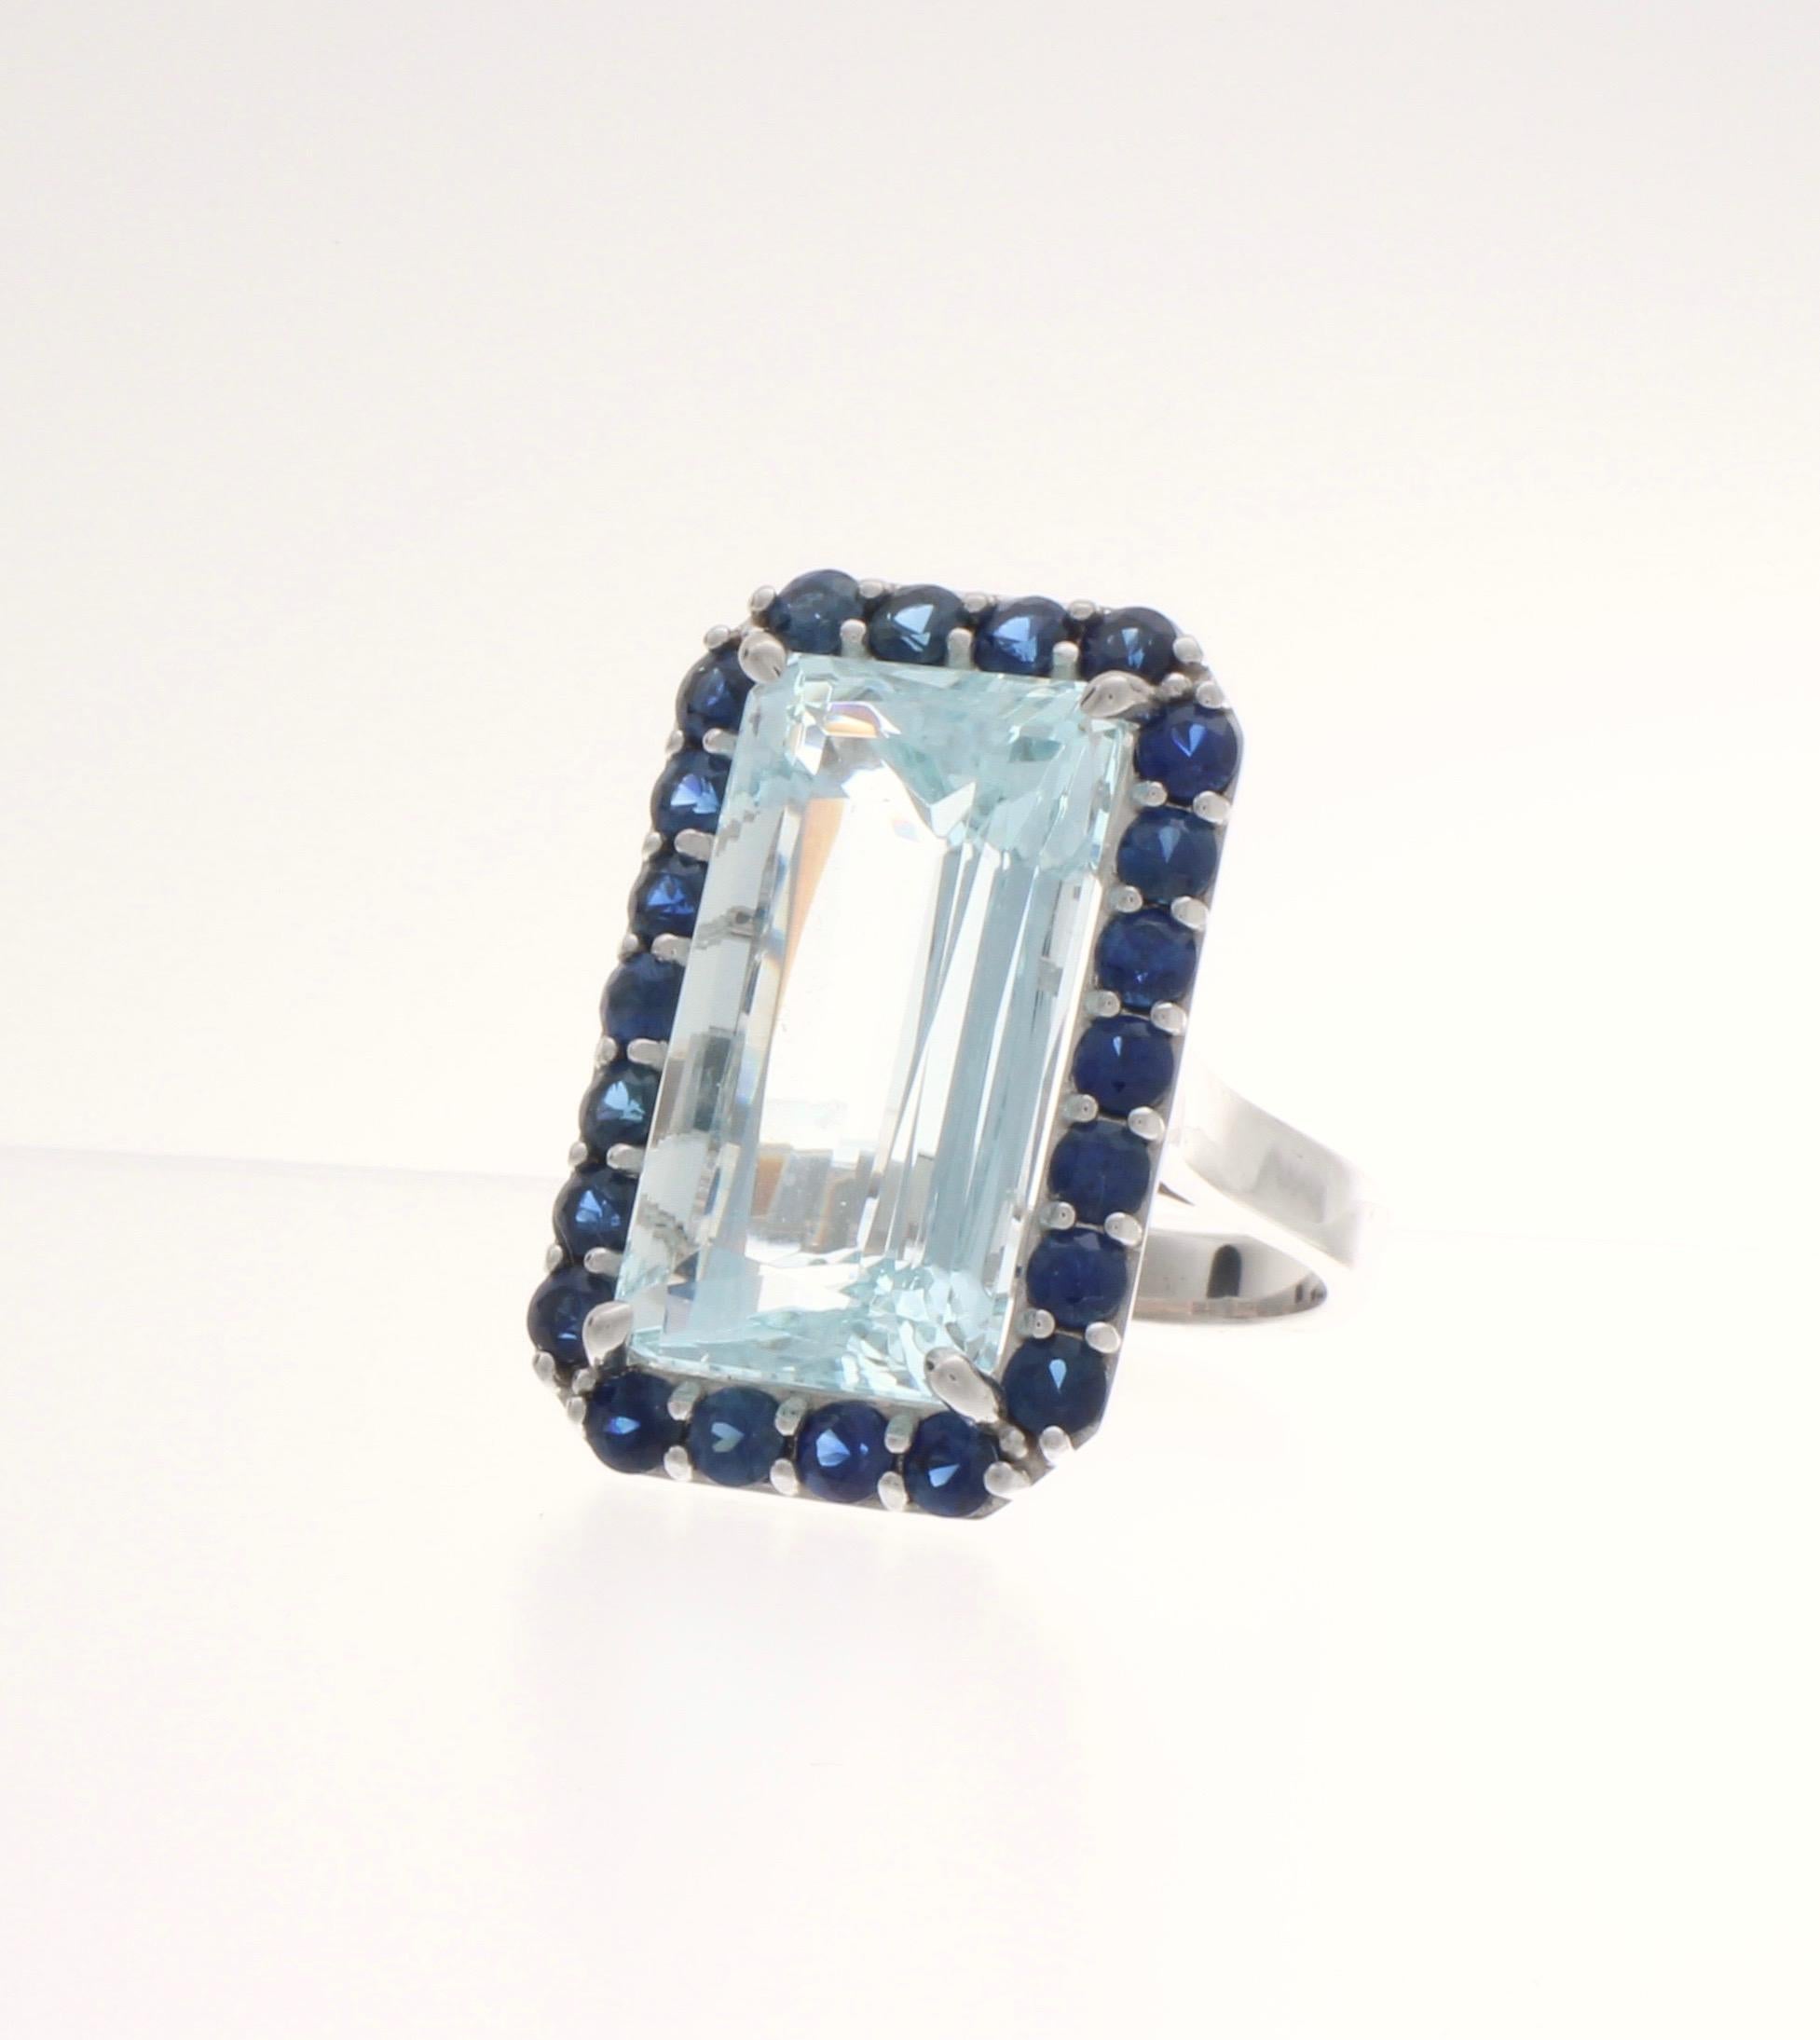 21 Carat emerald cut Aquamarine set with 23 AAA grade blue sapphires in solid 14 karat white gold.  One of a kind.